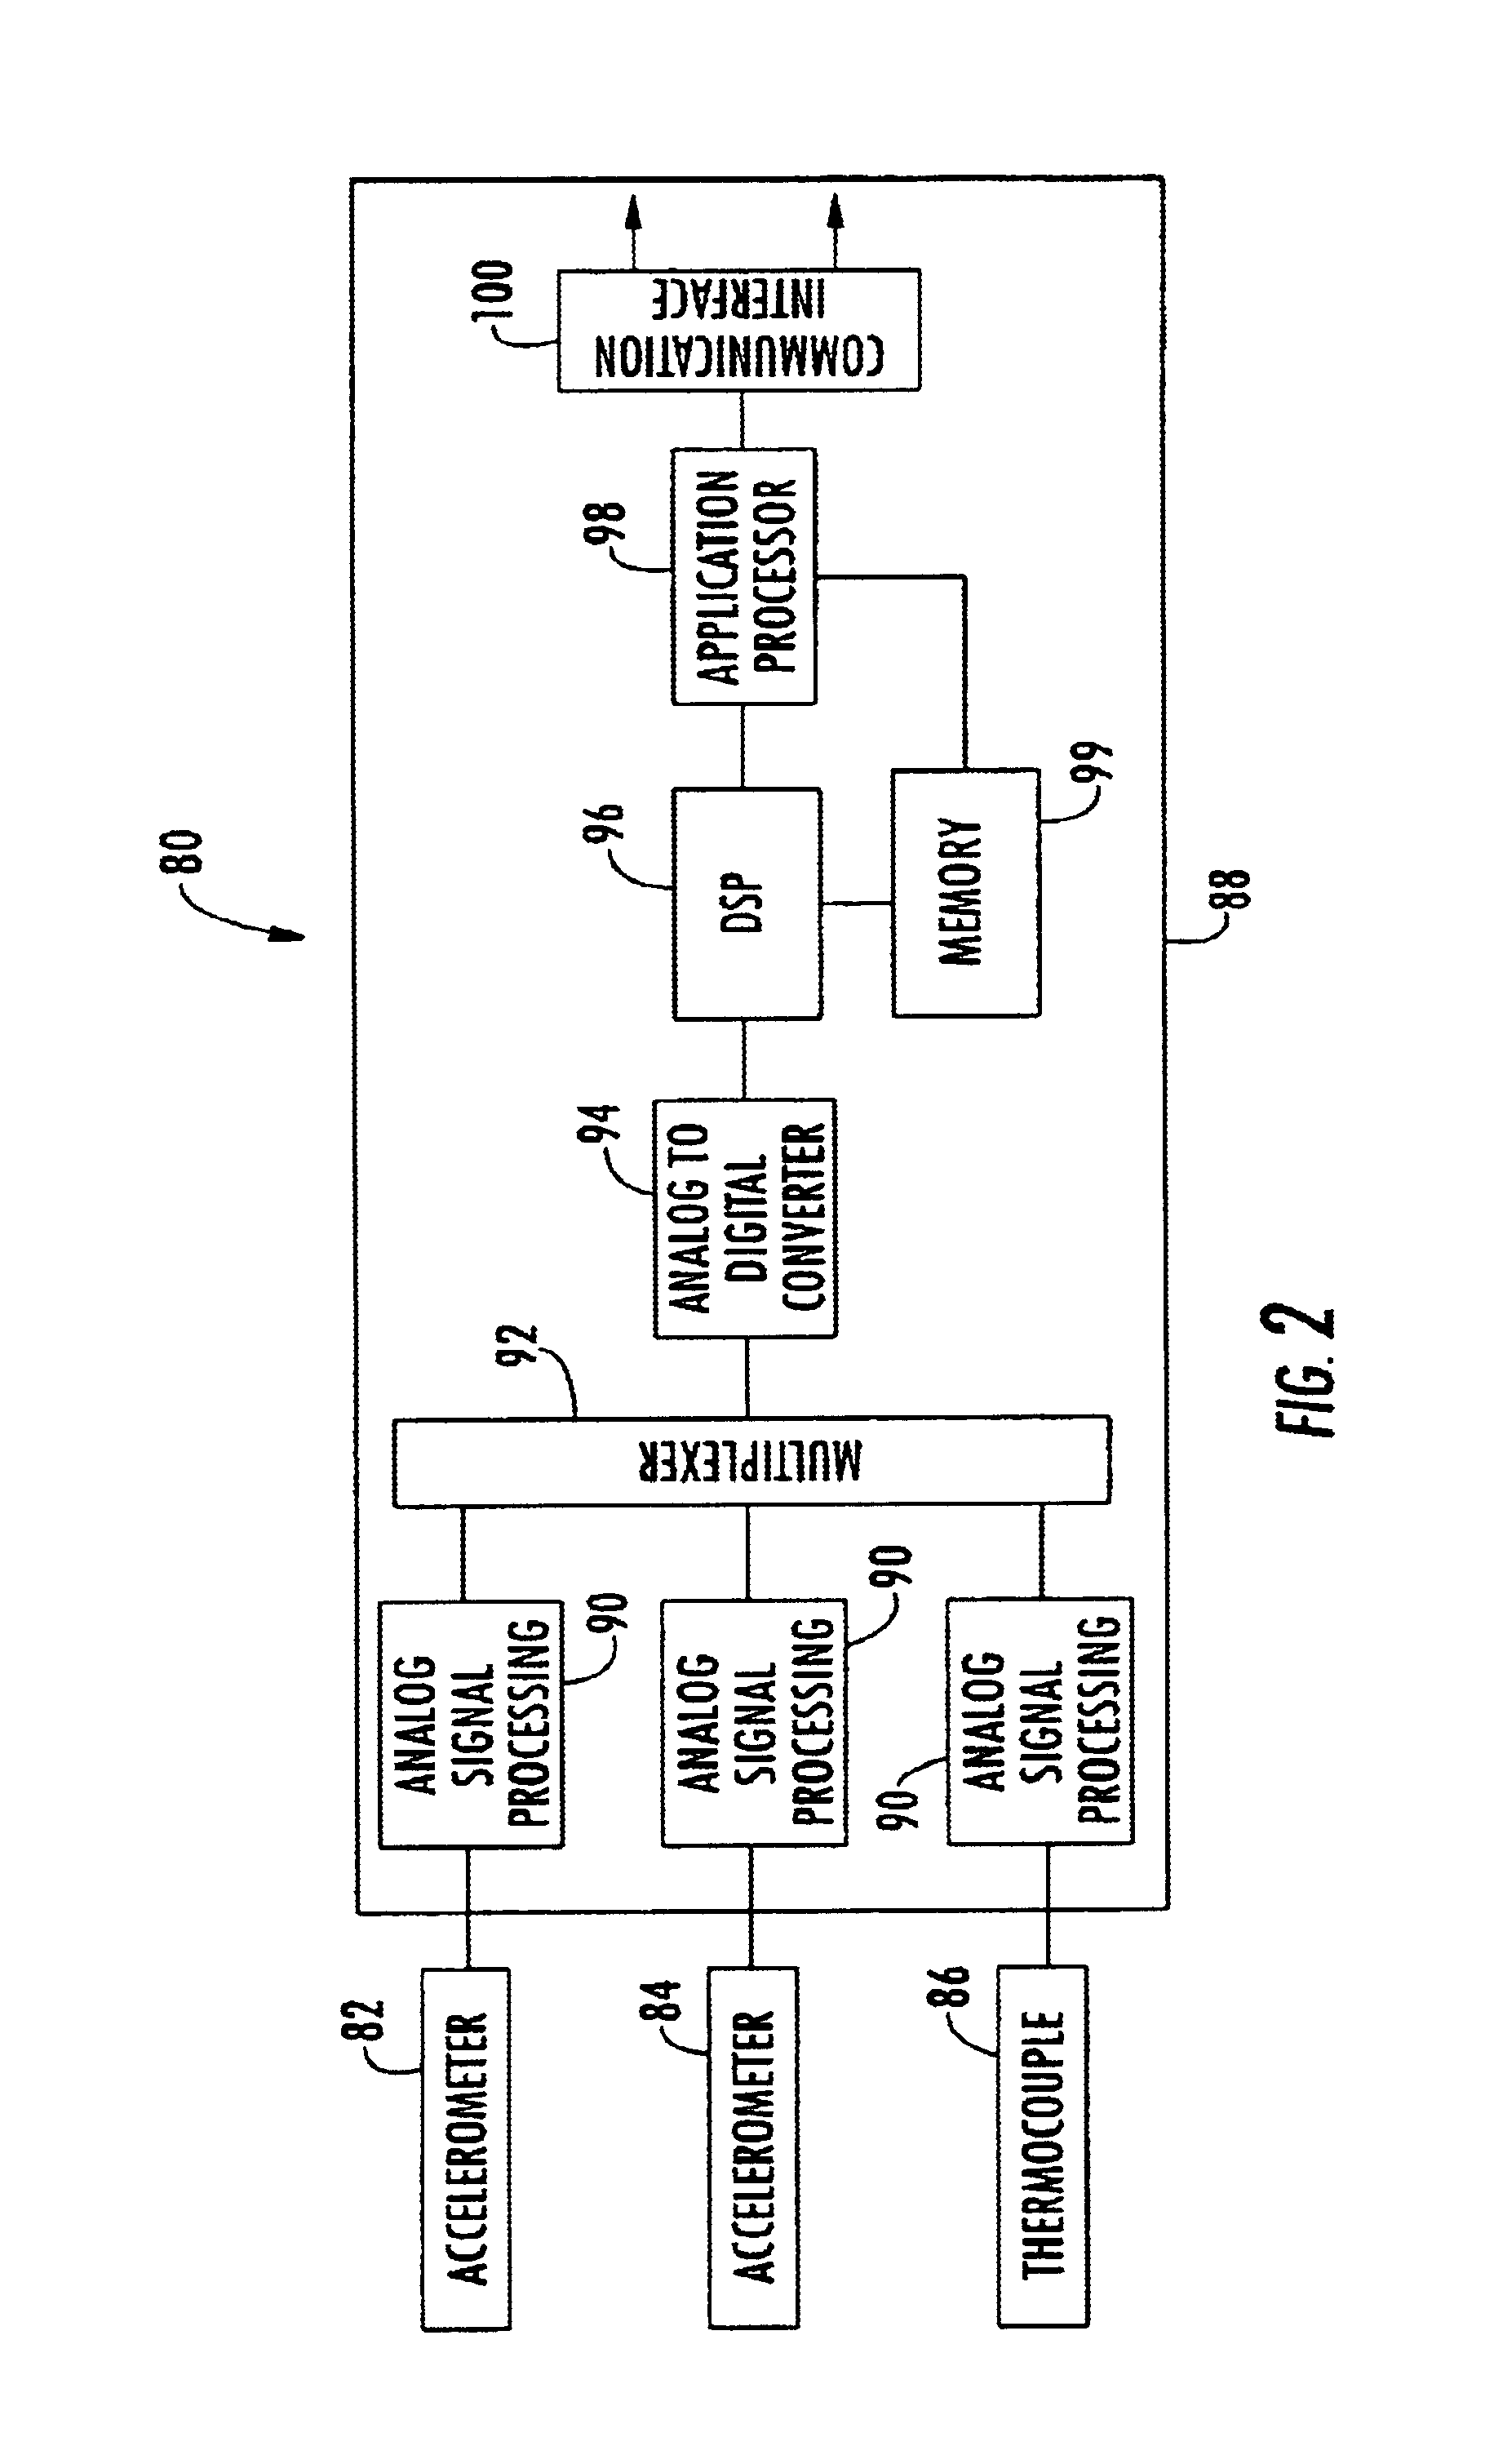 On-line rotating equipment monitoring device